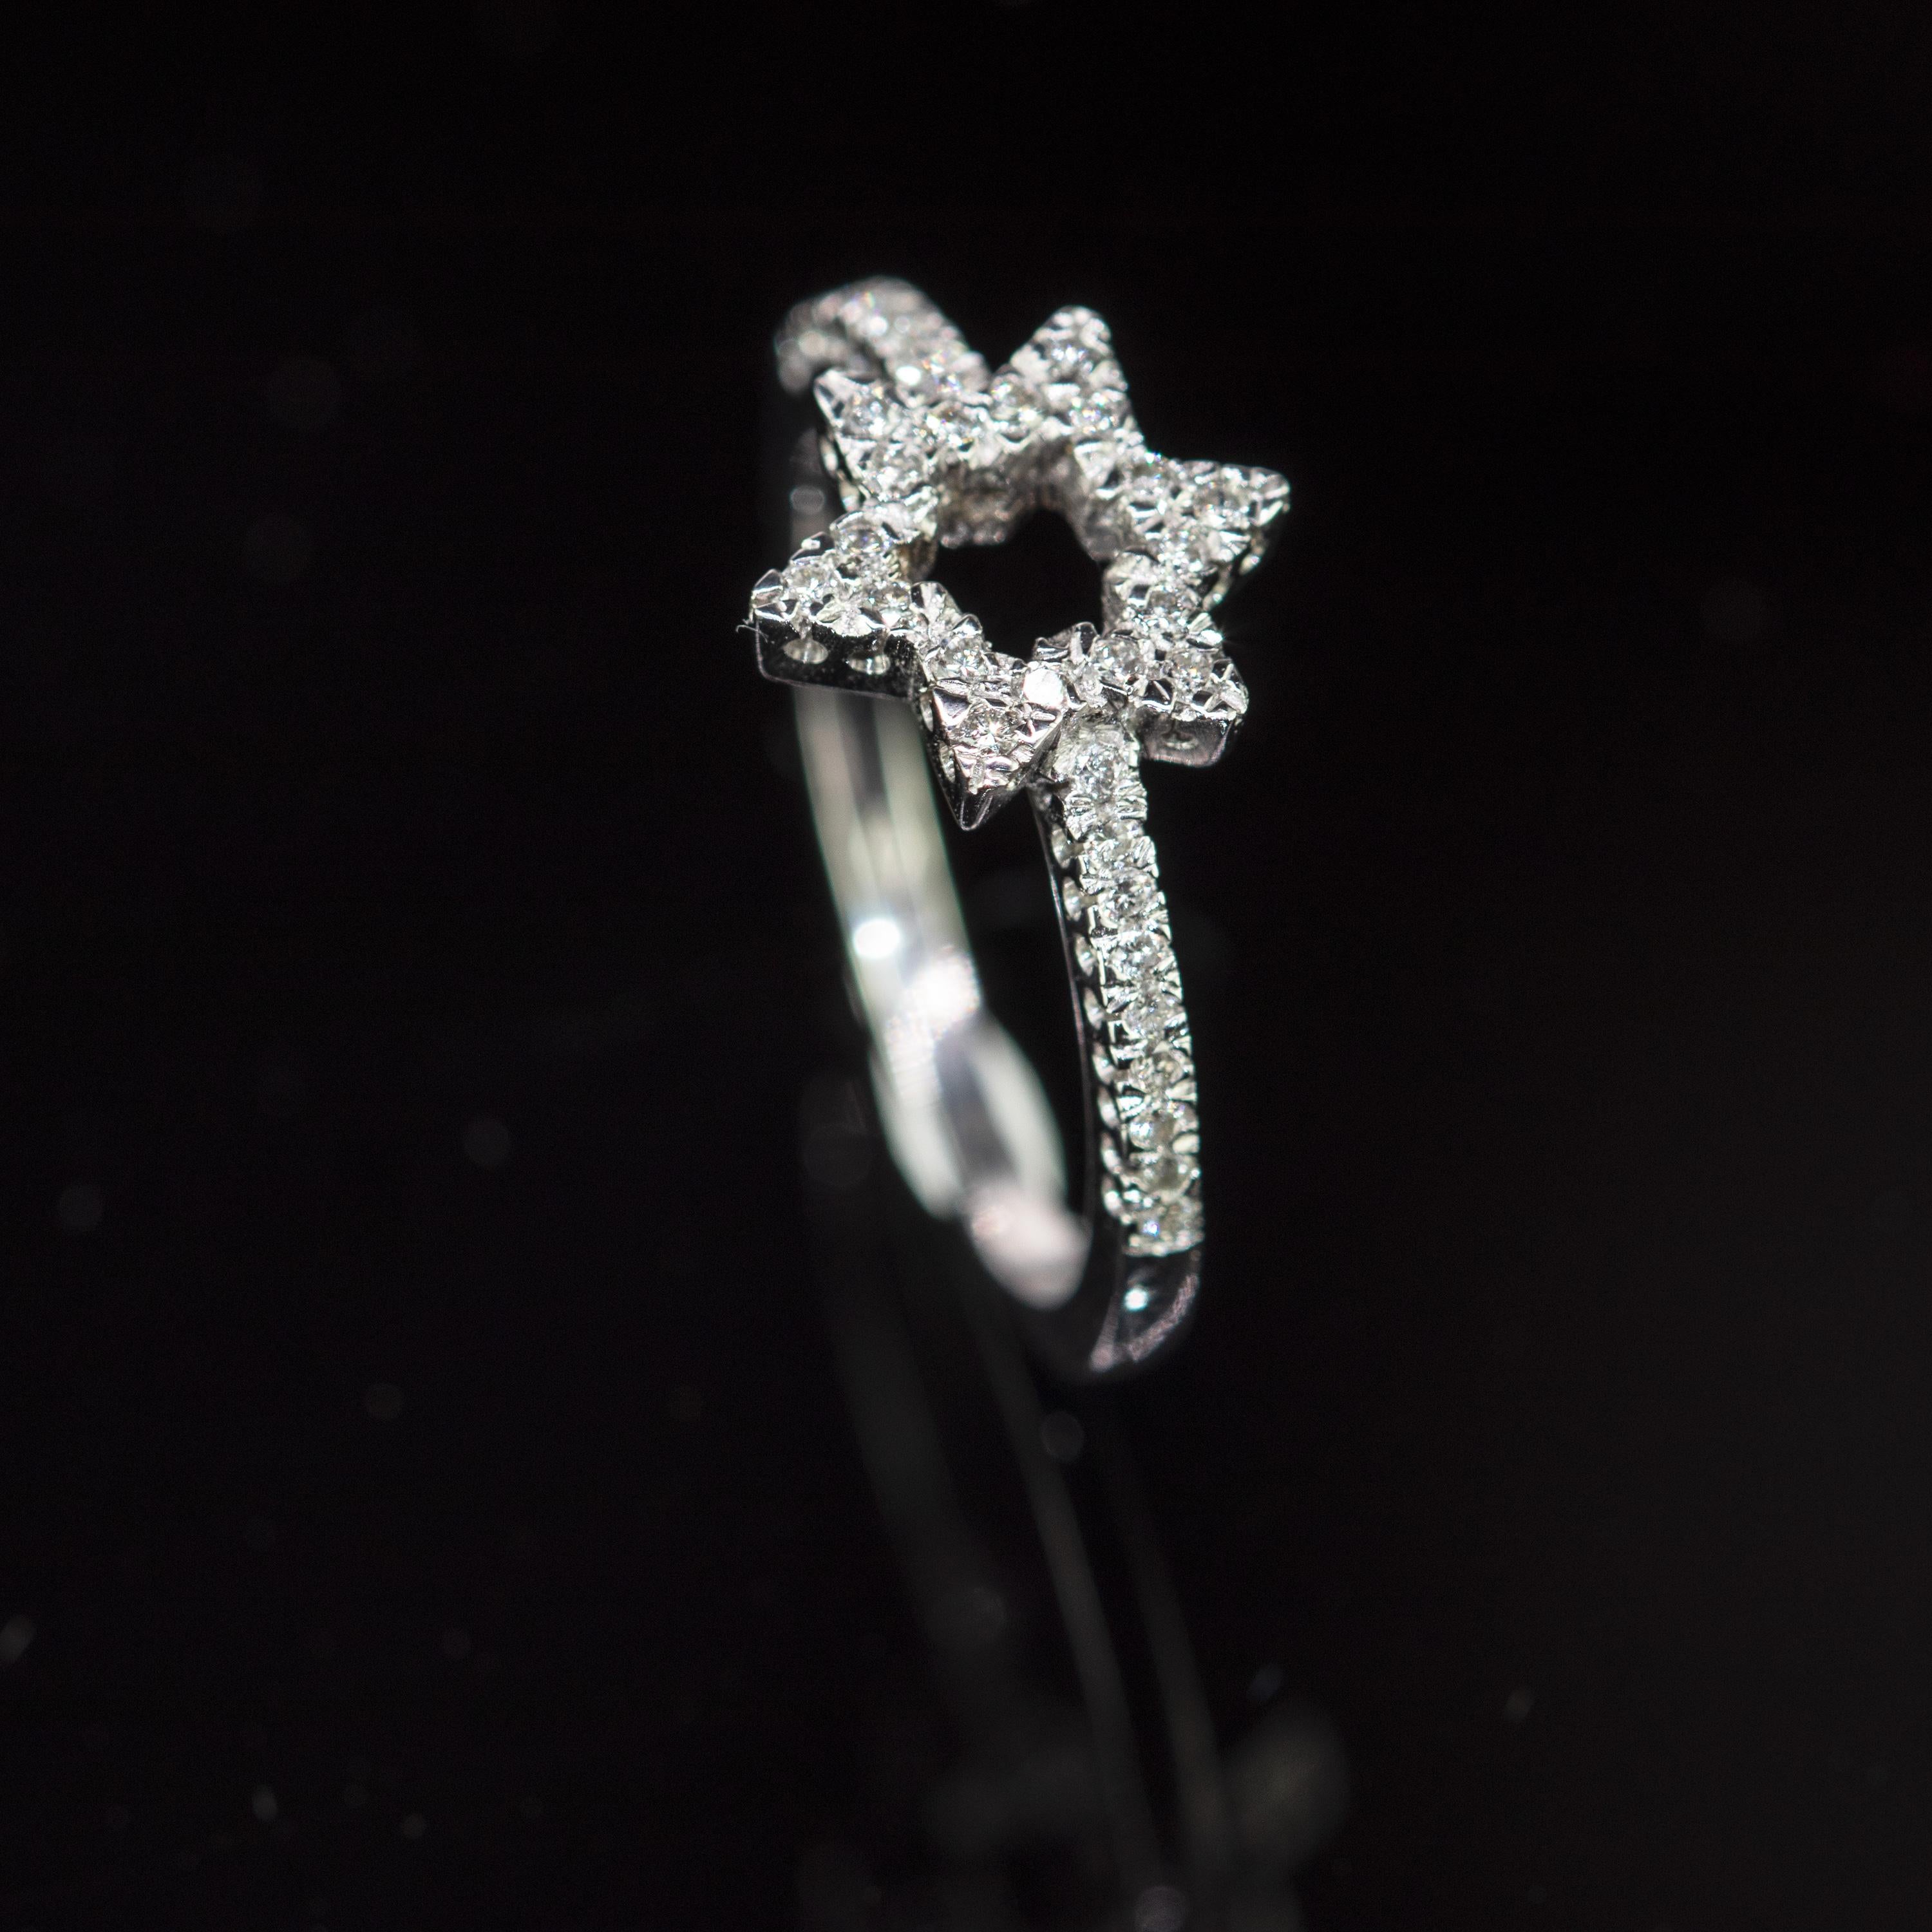 A delicate and sweet ring characterized by its diamonds that come together in the shape of a hexagonal star that sits on a band of diamonds in a 18k white gold setting.
 
This ring is inspired by the brilliance of its diamonds that from far away